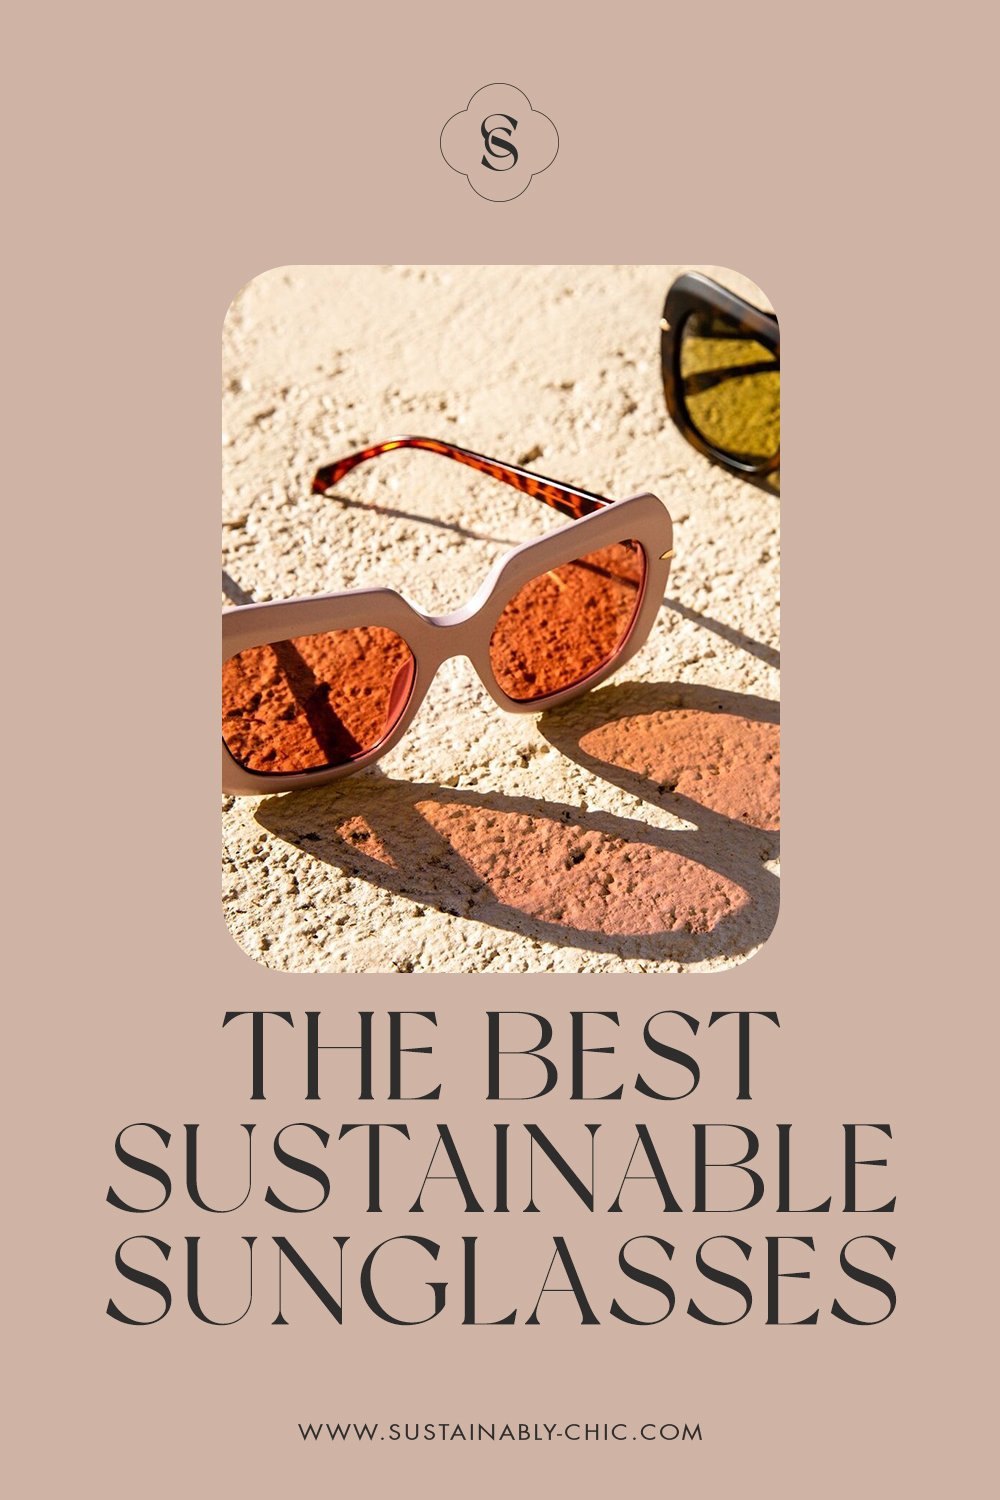 The 9 Best Sustainable Sunglasses Brands